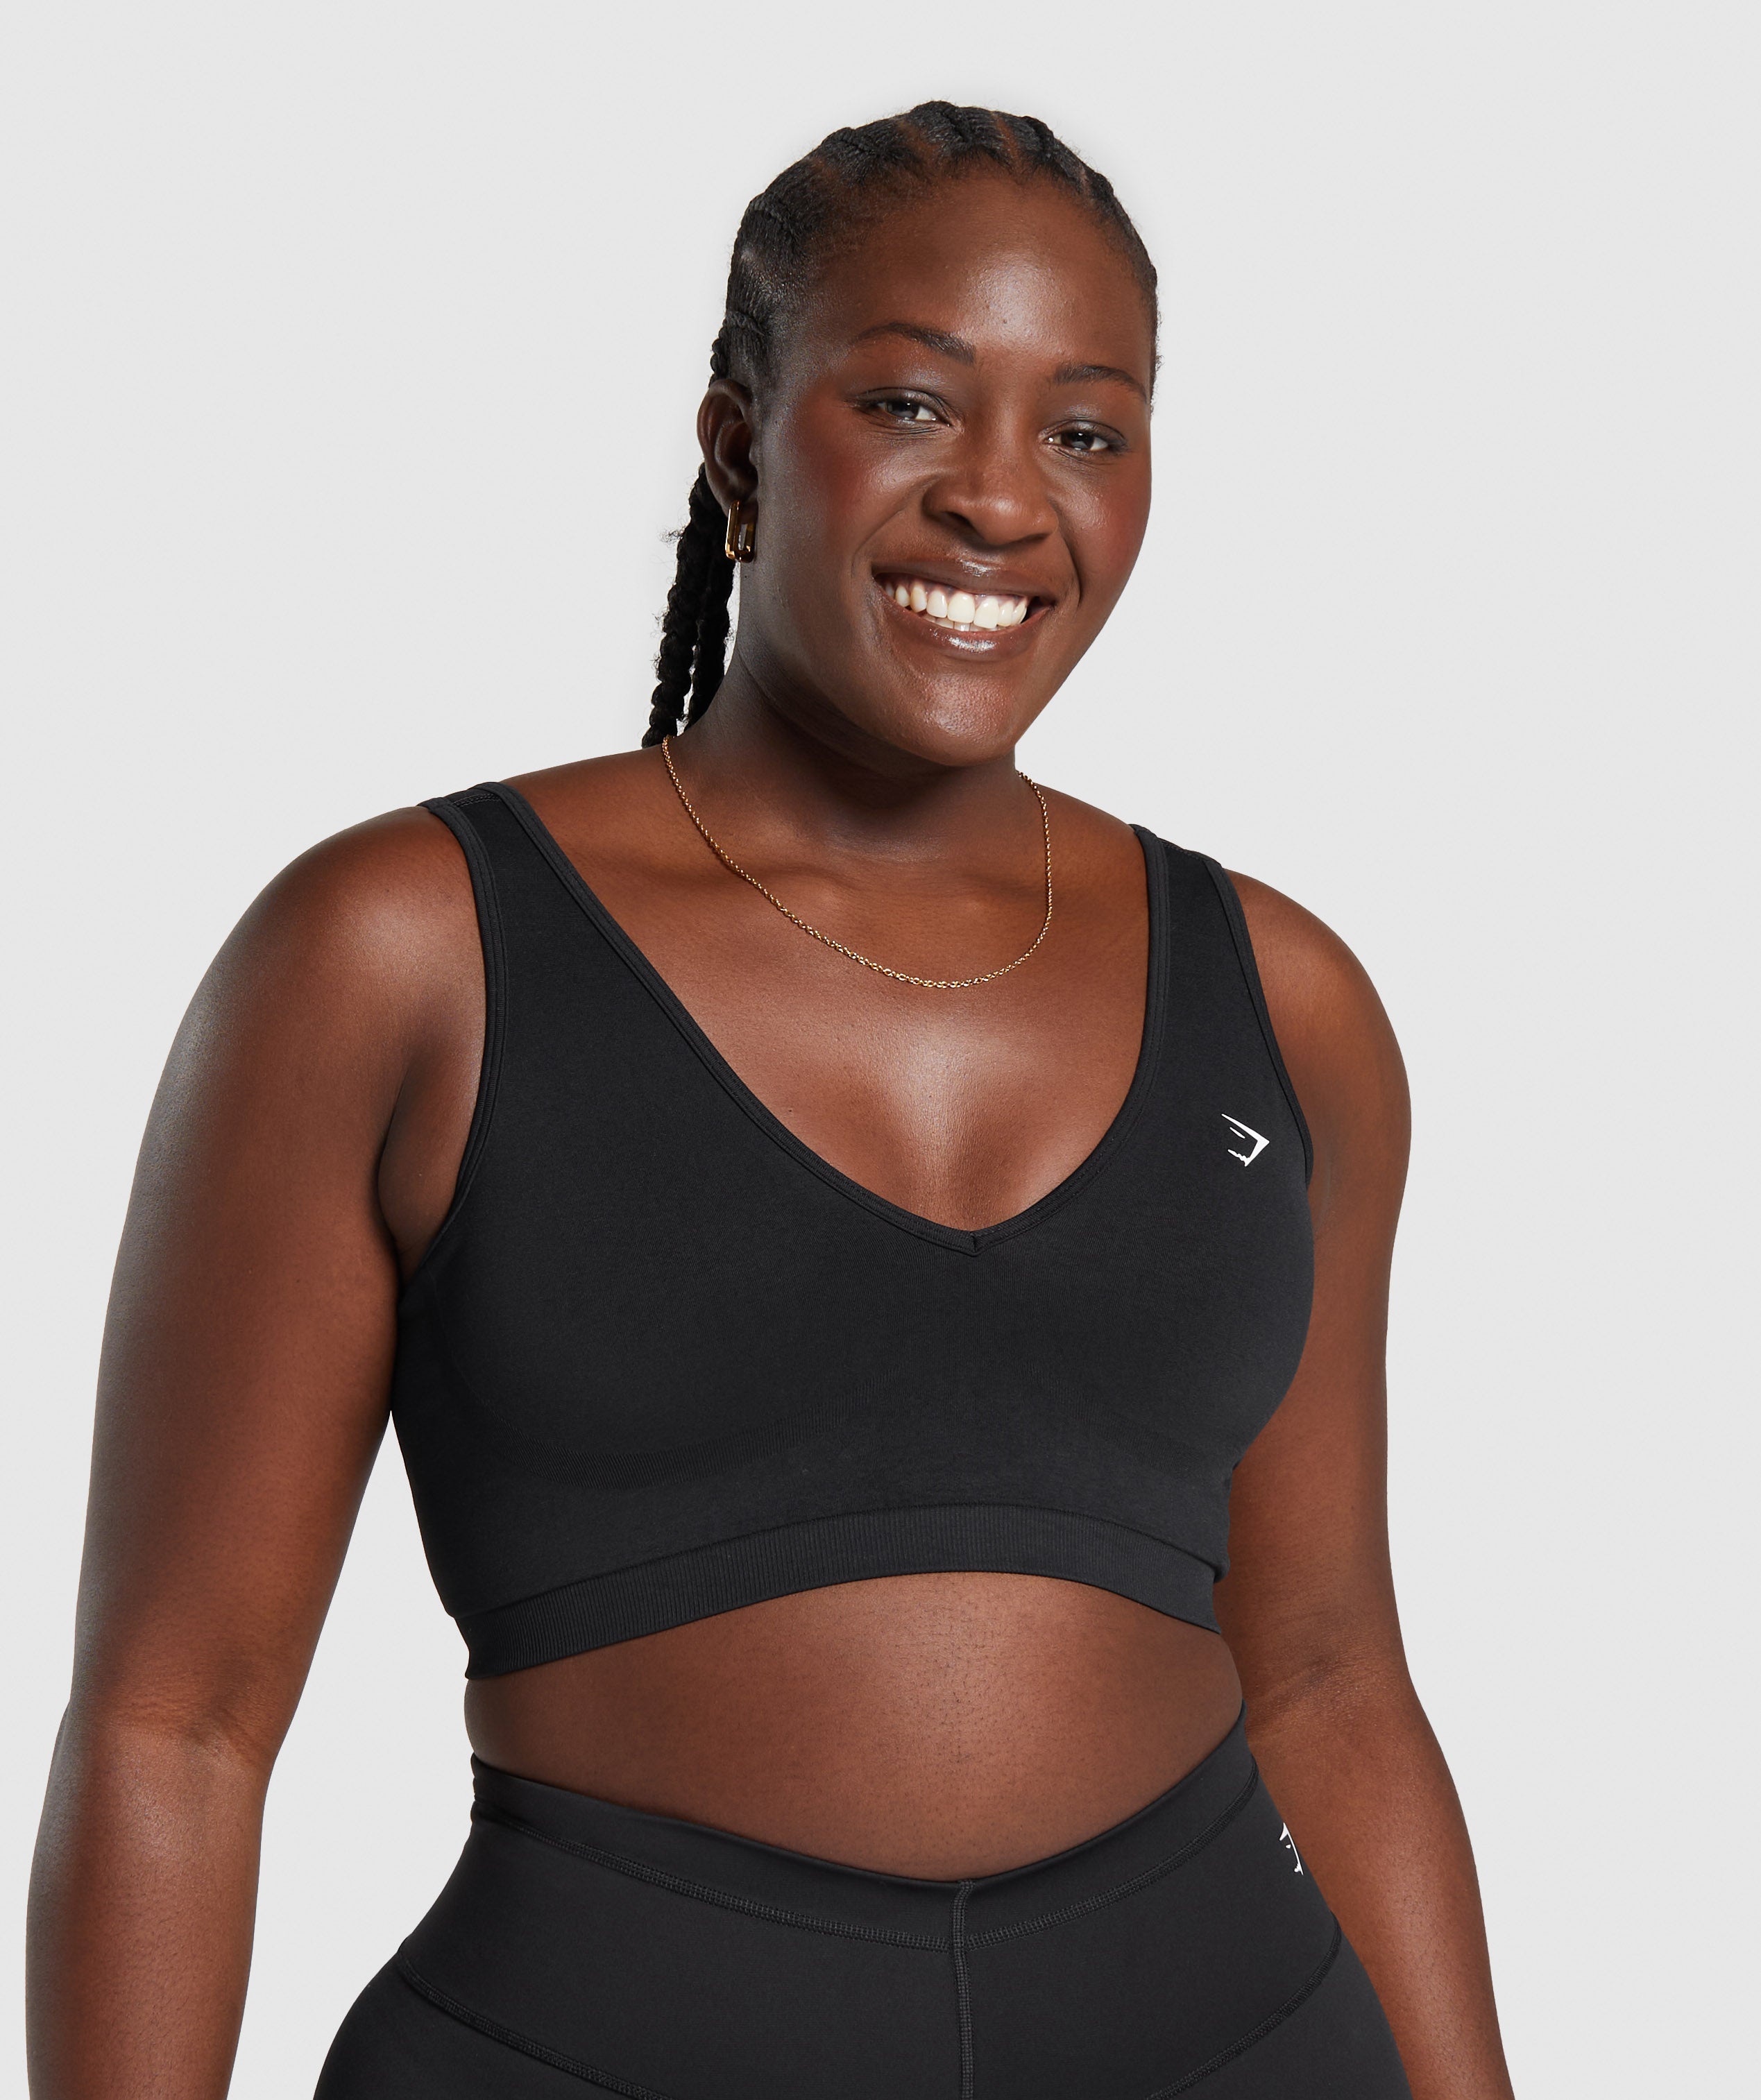 Sports Bras - Can You Use Them for Daily Wear?